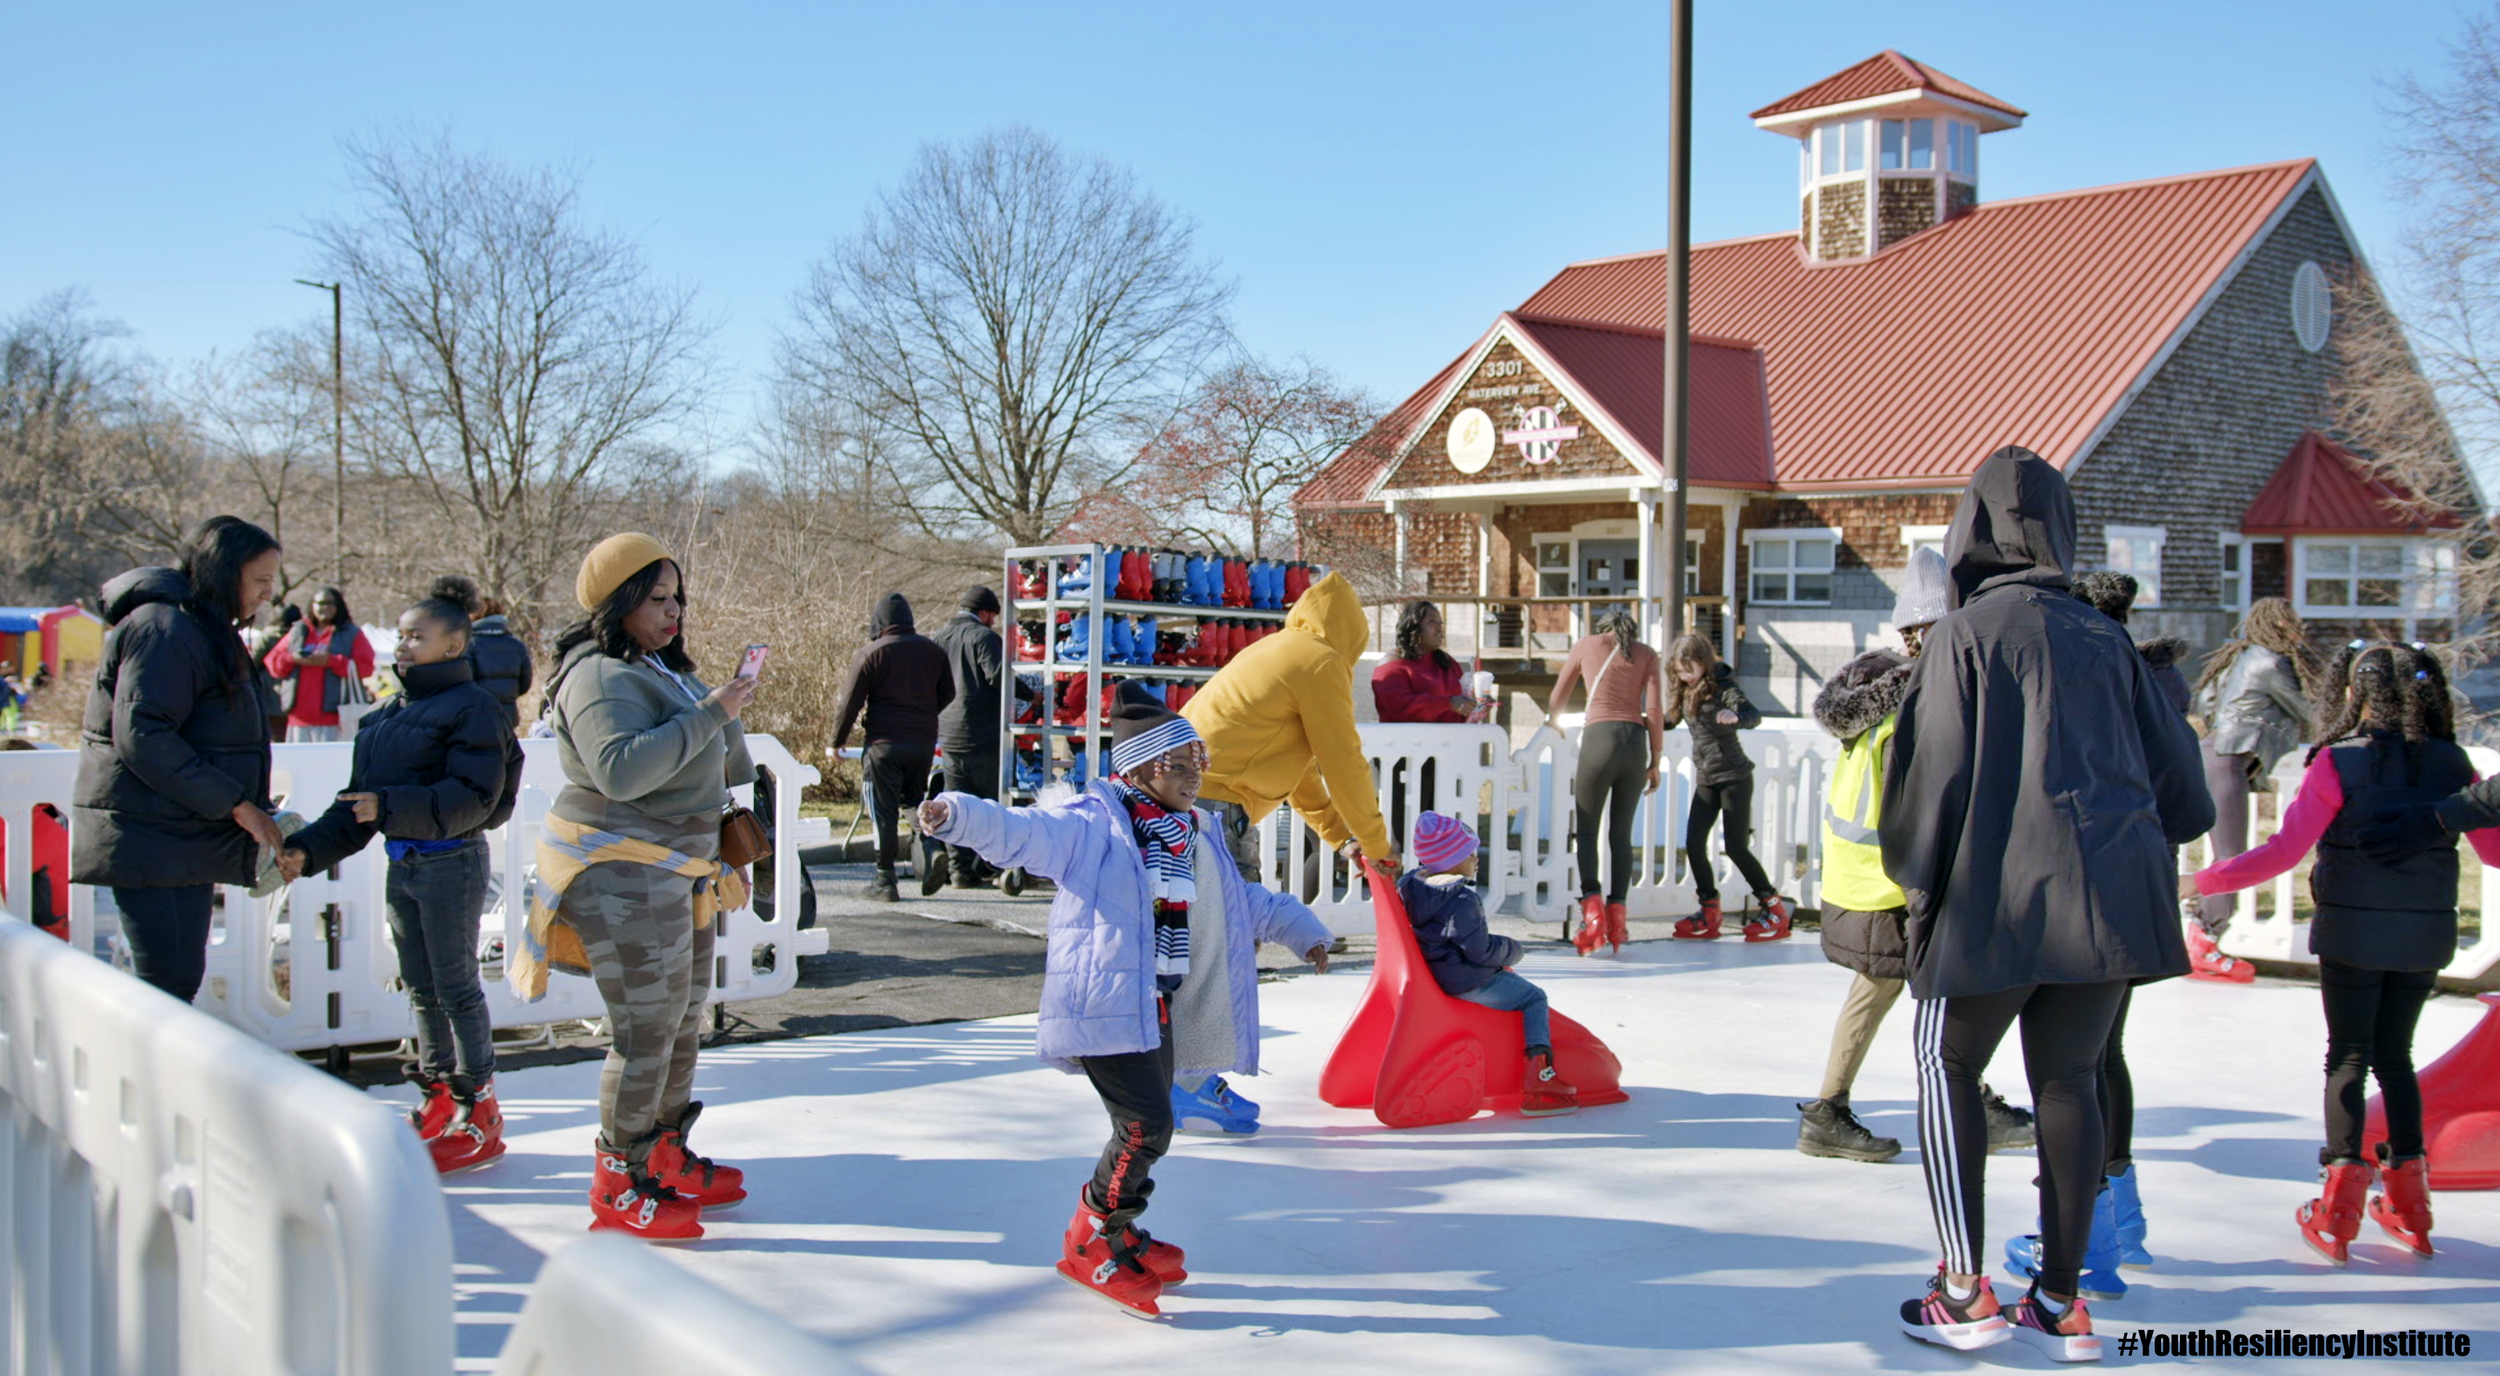  People are enjoying the ice-skating rink in Middle Branch Park with a view of the red roof boathouse in the background. 